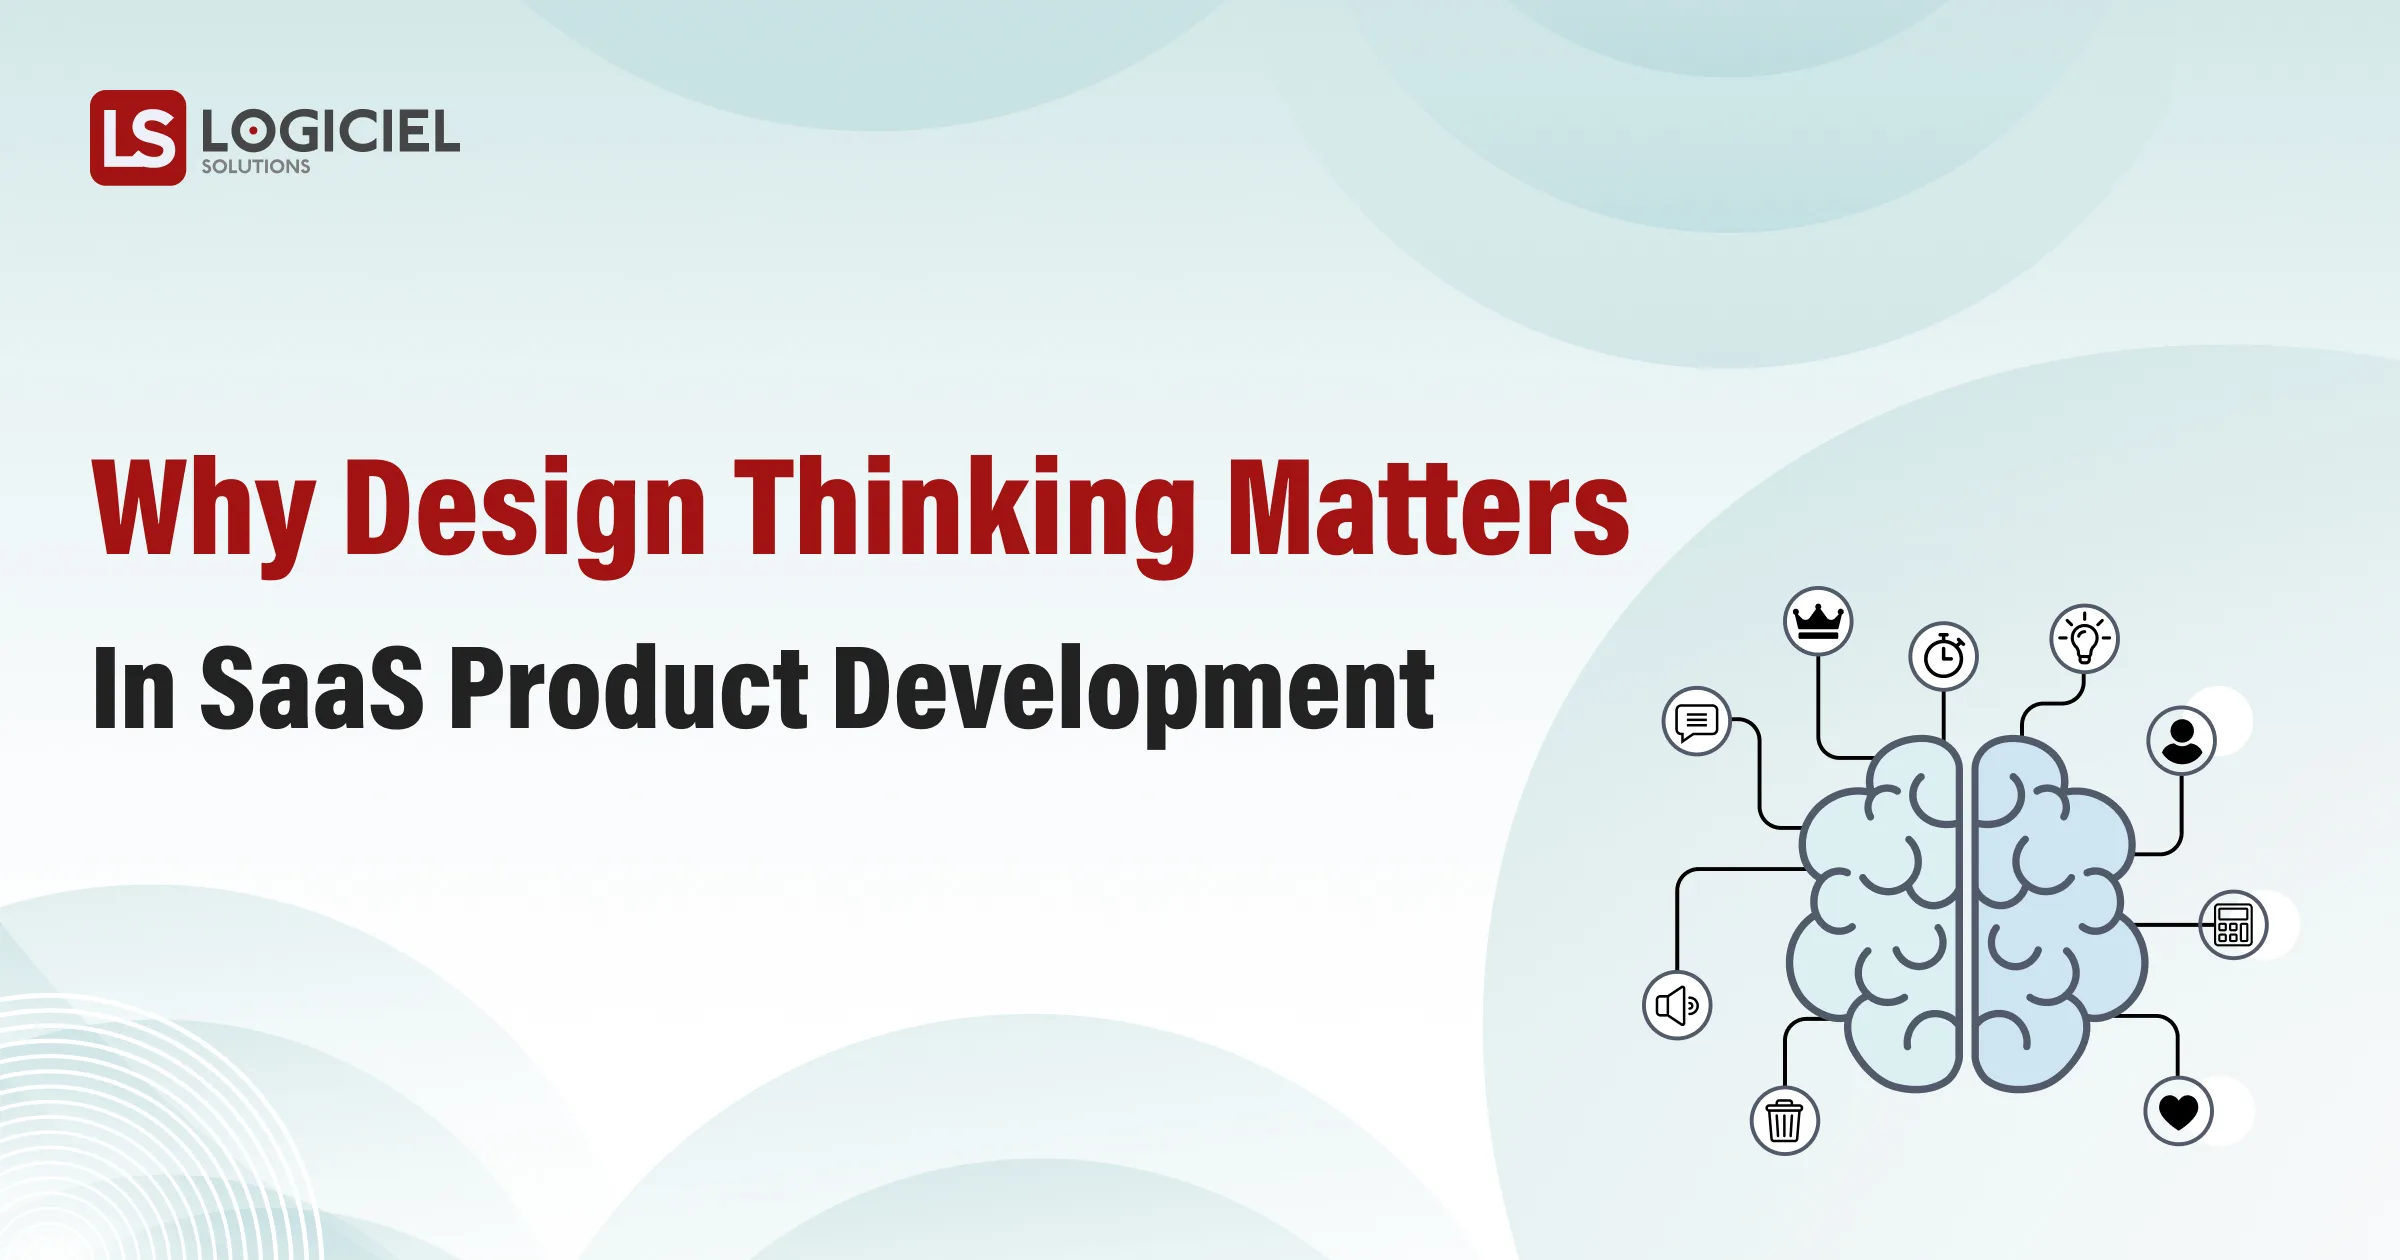 Why Design Thinking Matters in SaaS Product Development